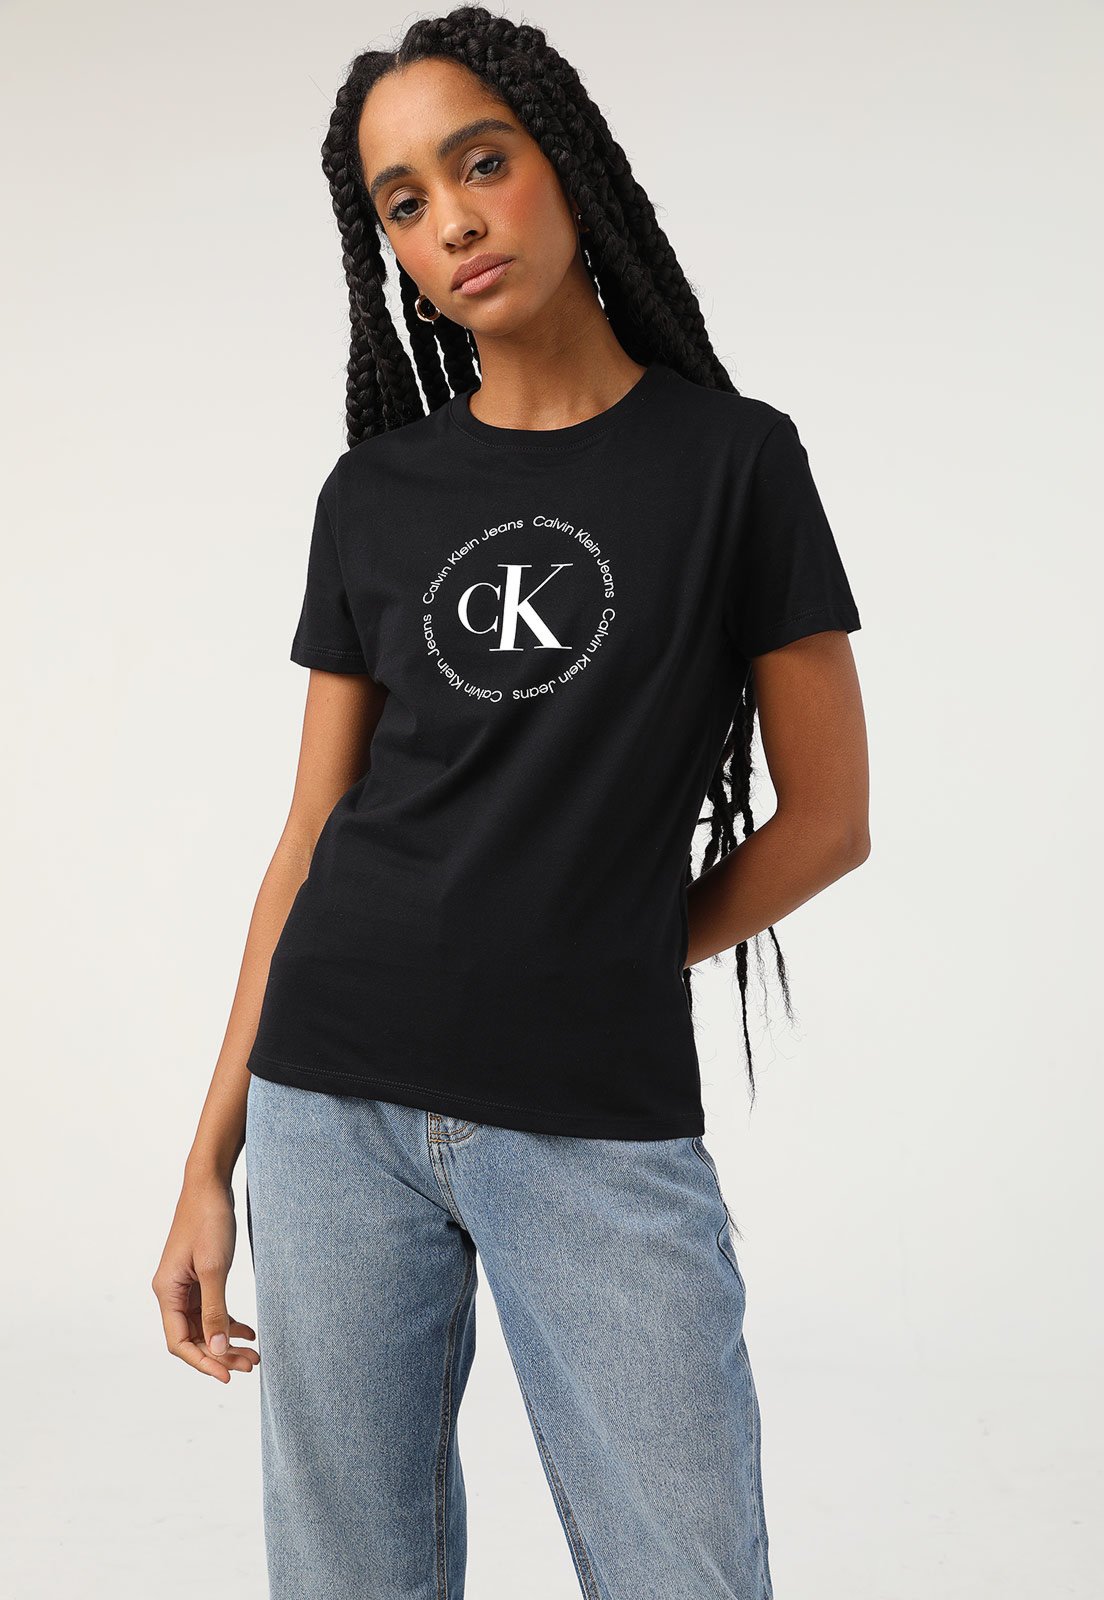 BLUSA CALVIN KLEIN JEANS I USED TO BE A CK T-SHIRT